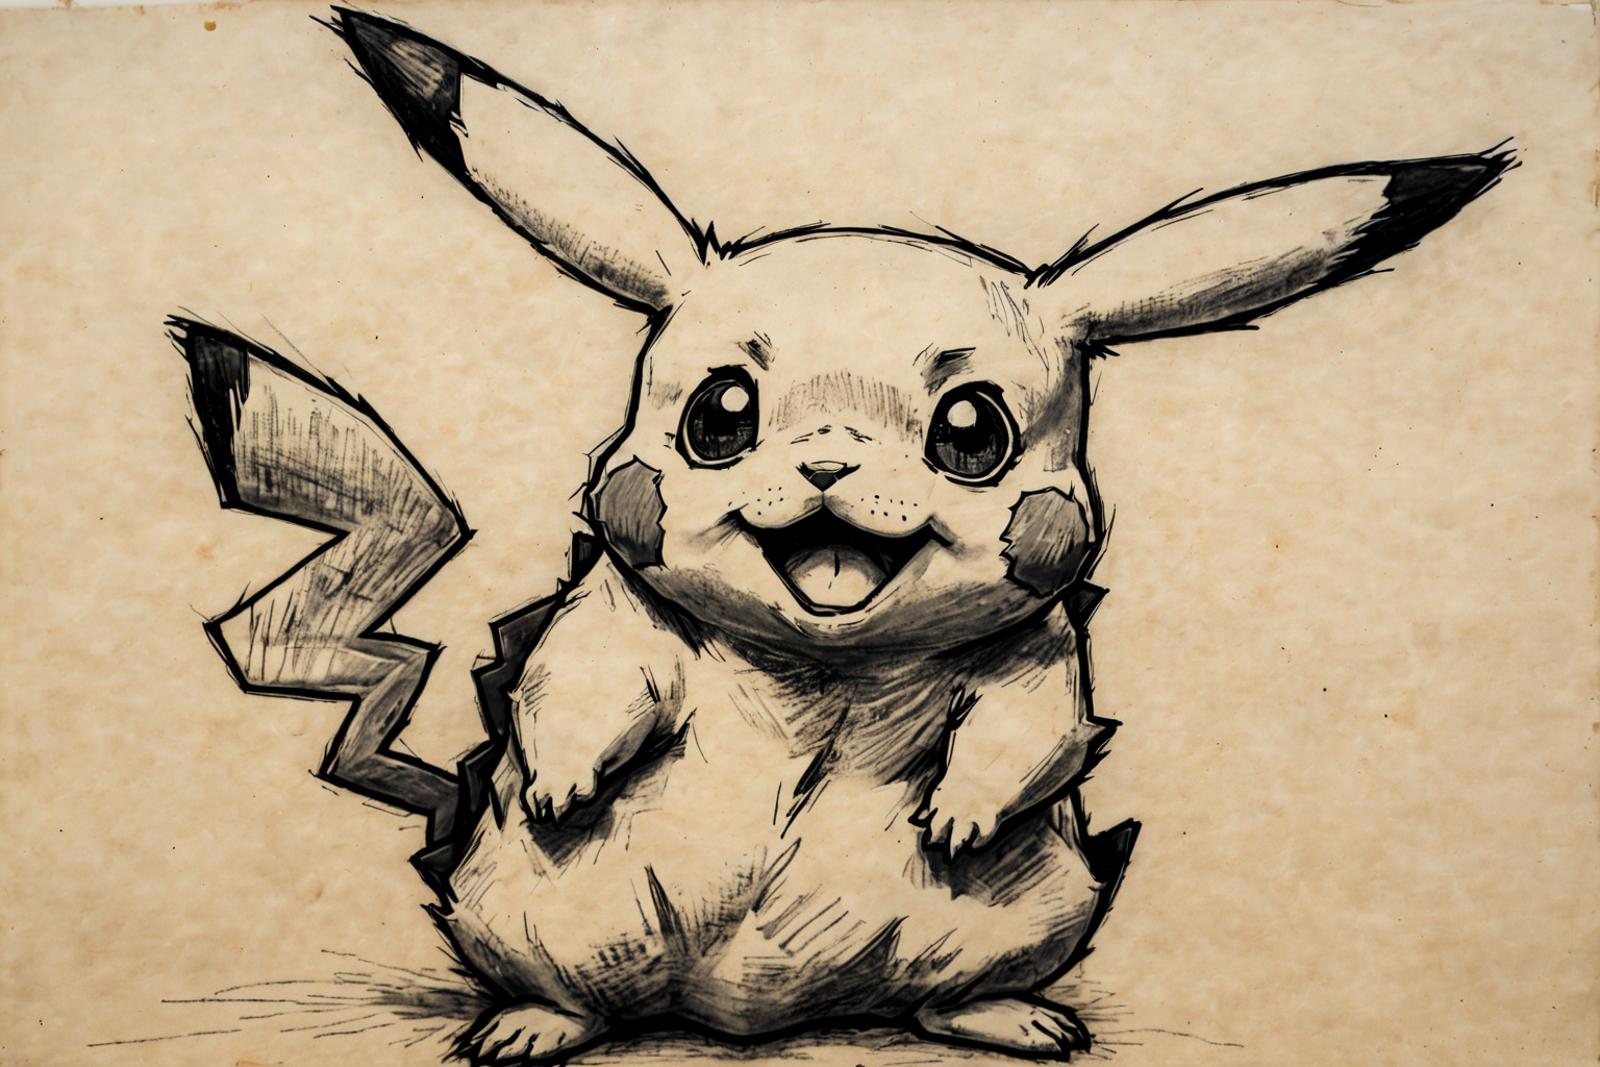 A smiling cartoon Pikachu drawn on a piece of paper.